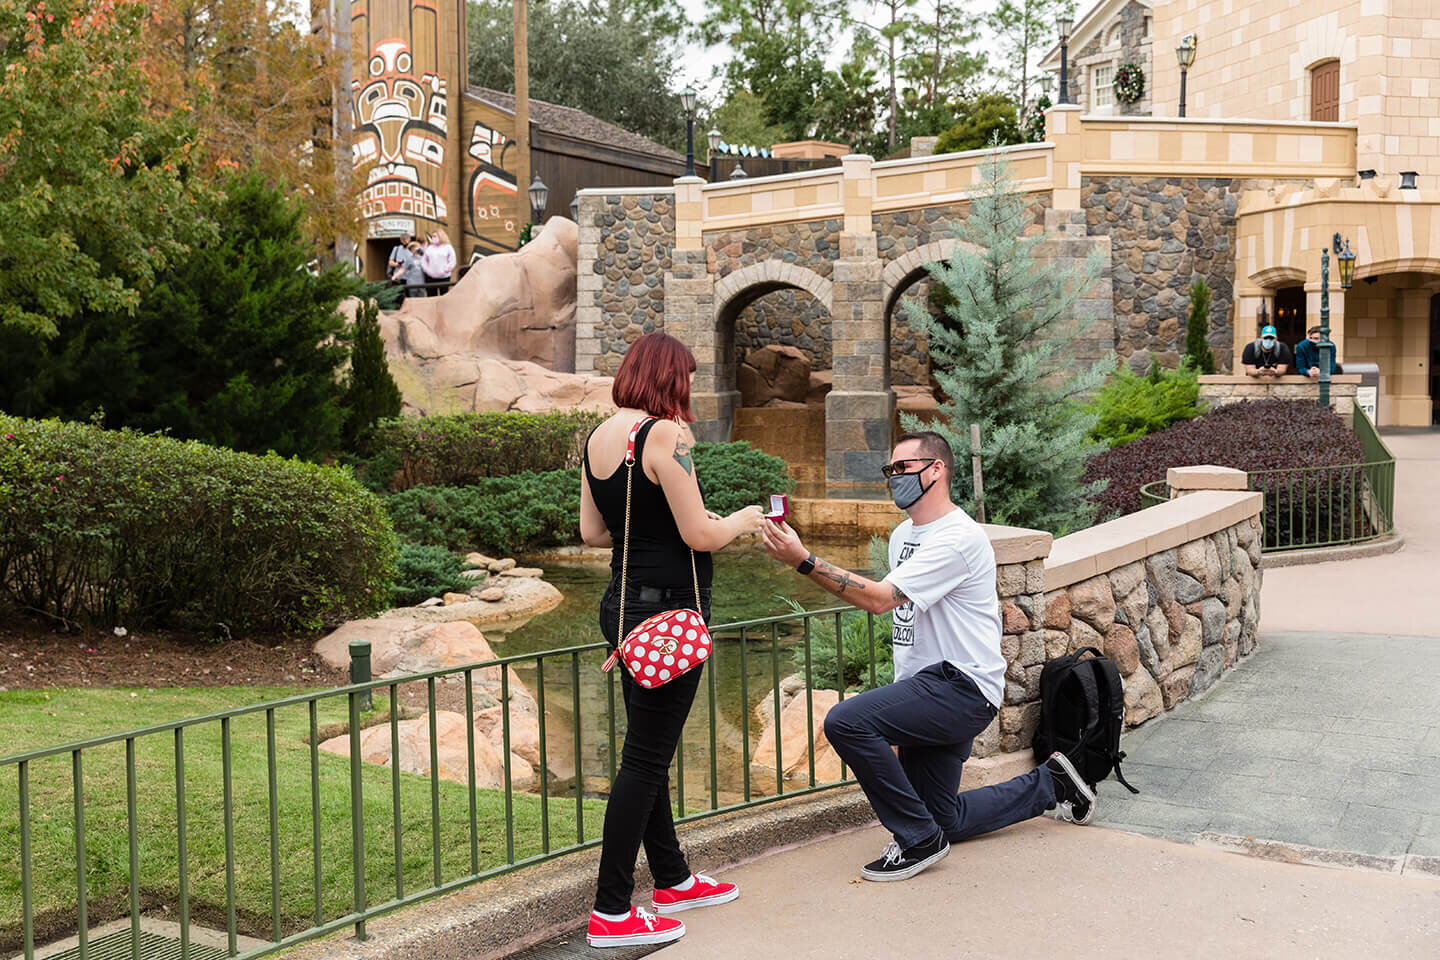  Epcot marriage proposal 